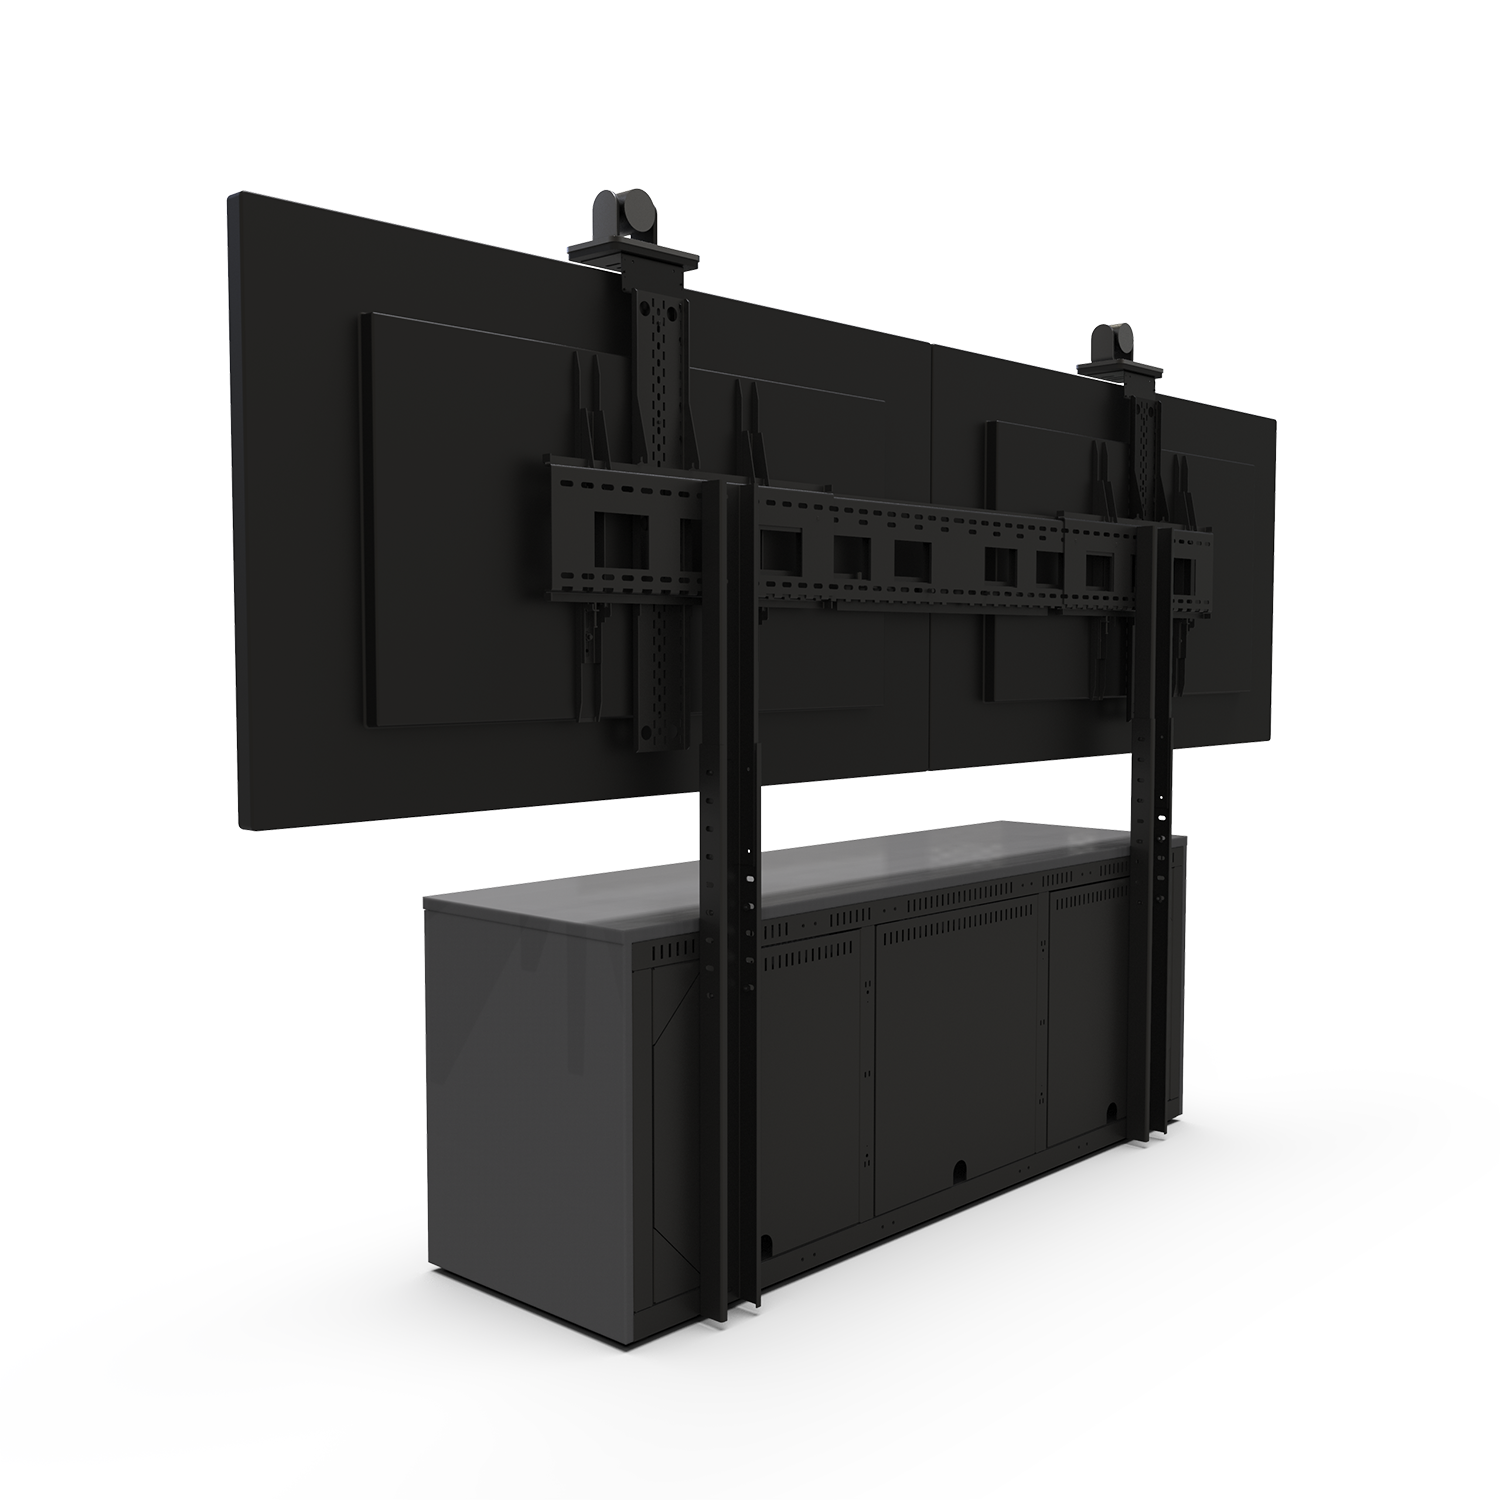 3-Bay Credenza with dual 75 inch displays and two PTZ cameras back view